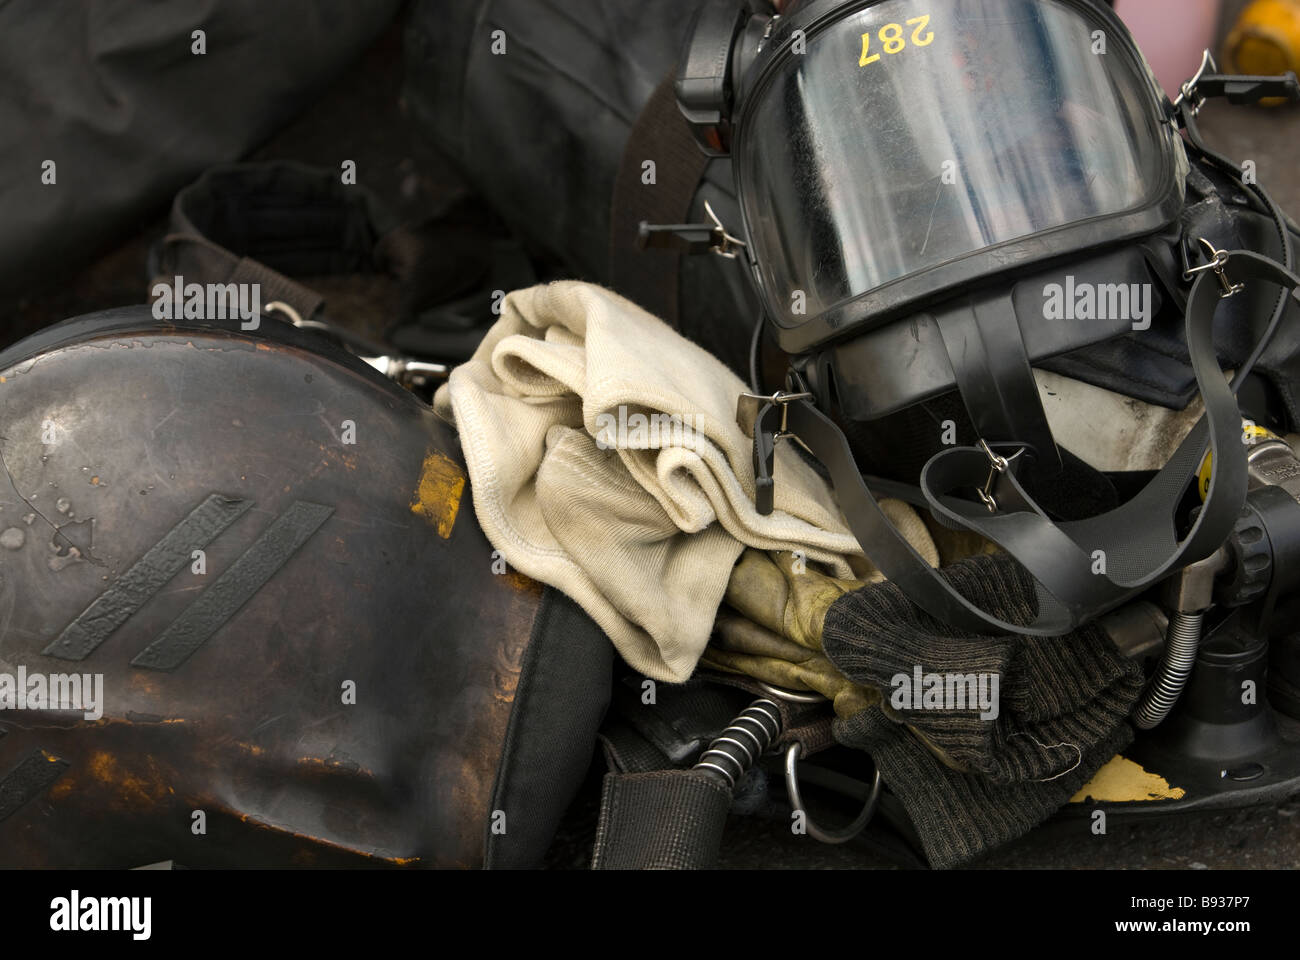 Fireman's helmet, Breathing Apparatus face mask and flash hood burnt black with fire Stock Photo